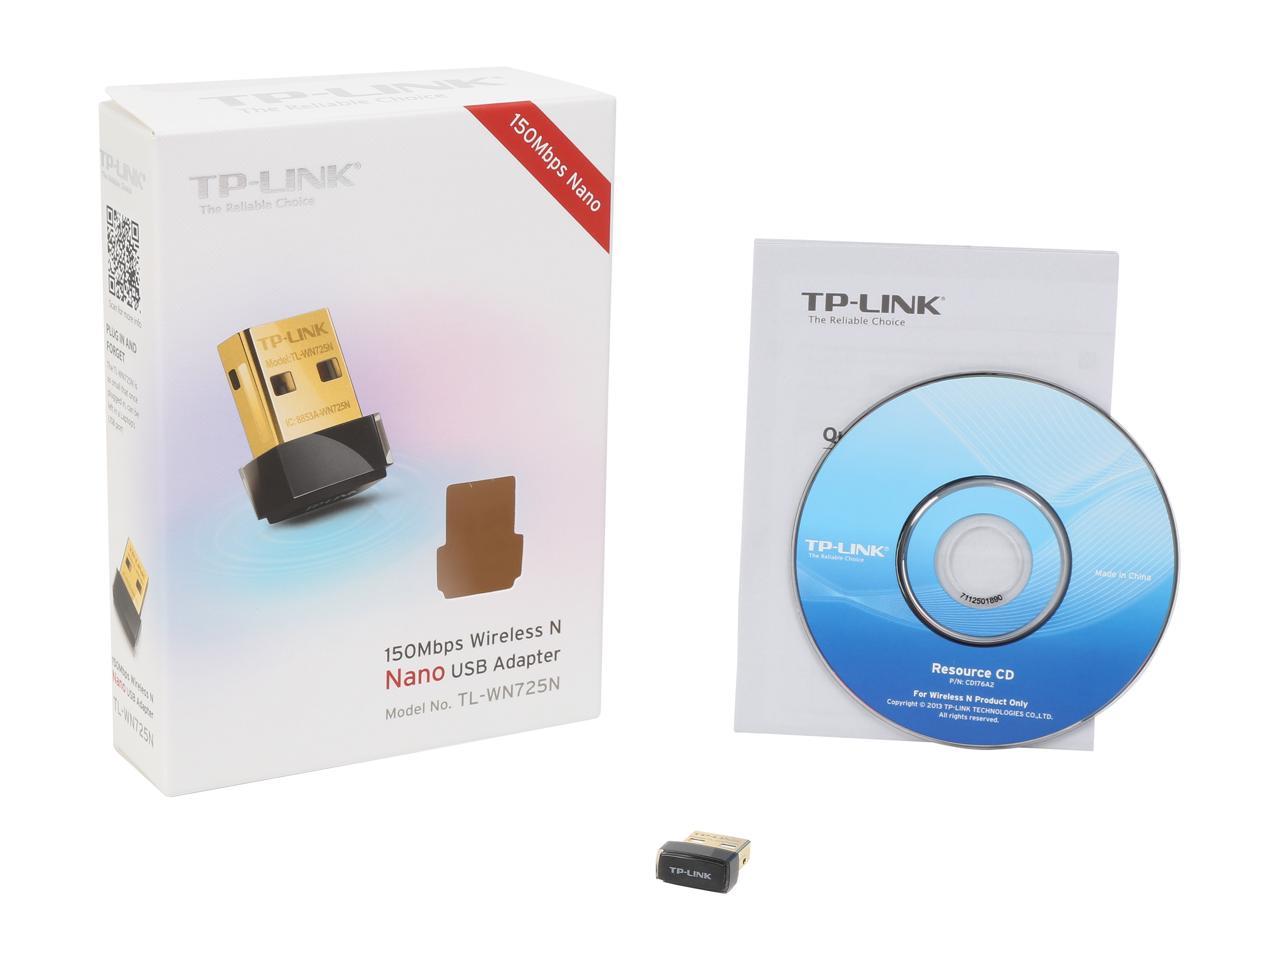 ballon At interagere Lada TP-Link USB WiFi Adapter for PC(TL-WN725N), N150 Wireless Network Adapter  for Desktop - Nano Size WiFi Dongle Compatible with Windows 10/7/8/8.1/XP/  Mac OS 10.9-10.15 Linux Kernel 2.6.18-4.4.3 - Newegg.com